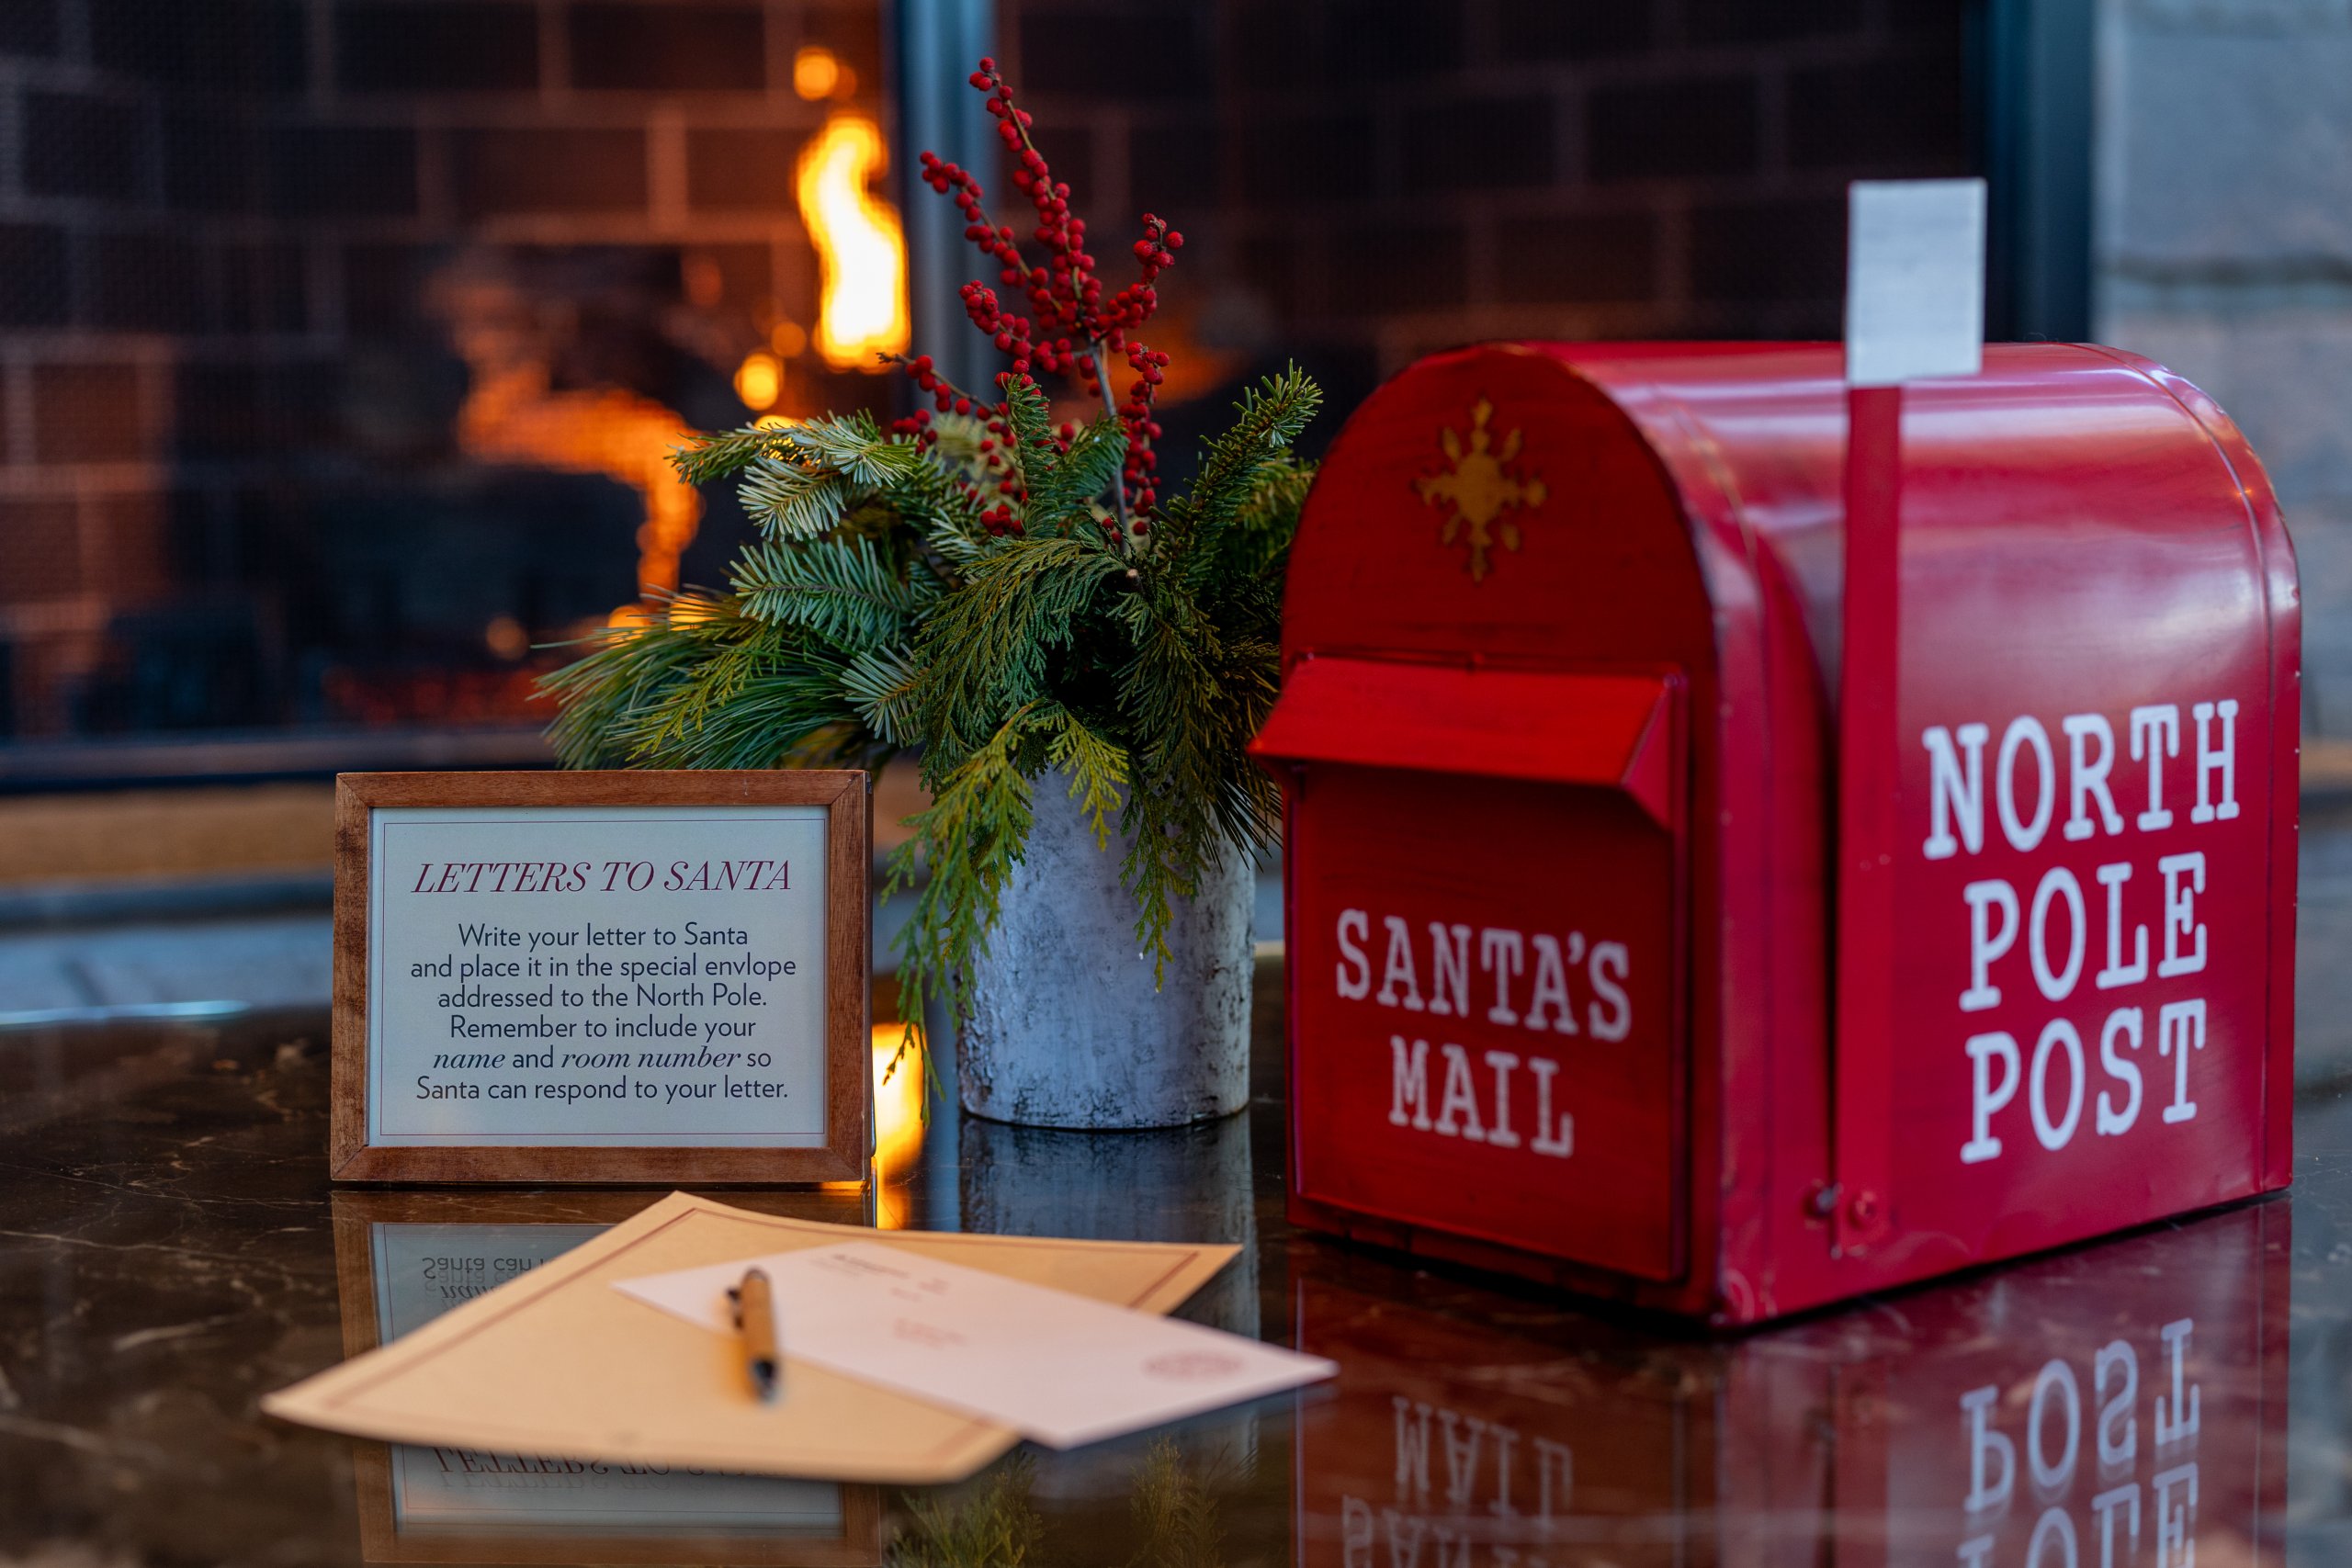 Letter to Santa on table with red north pole mailbox